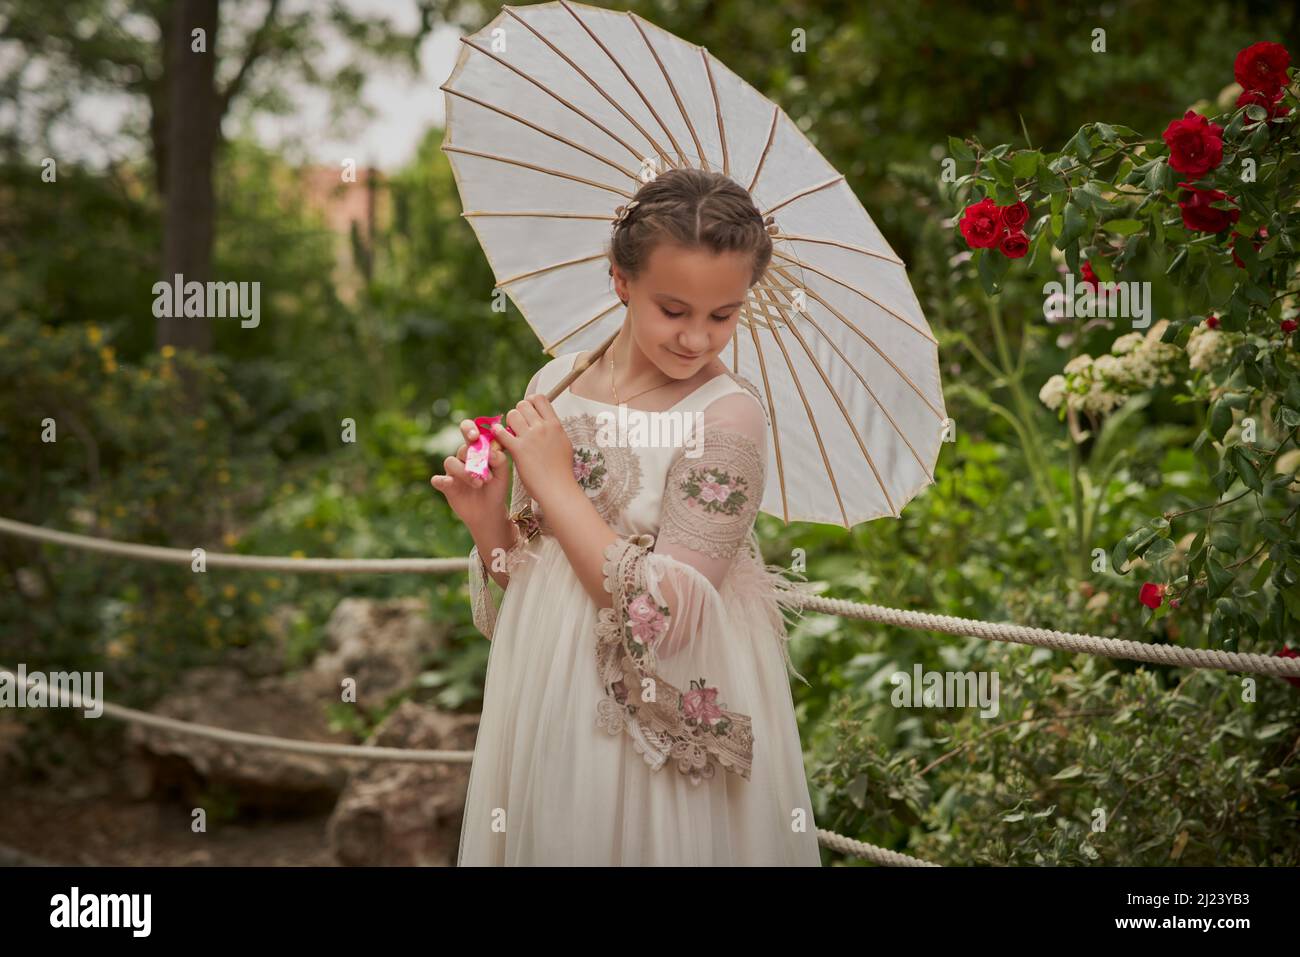 Communion girl posing with a white umbrella in a park Stock Photo